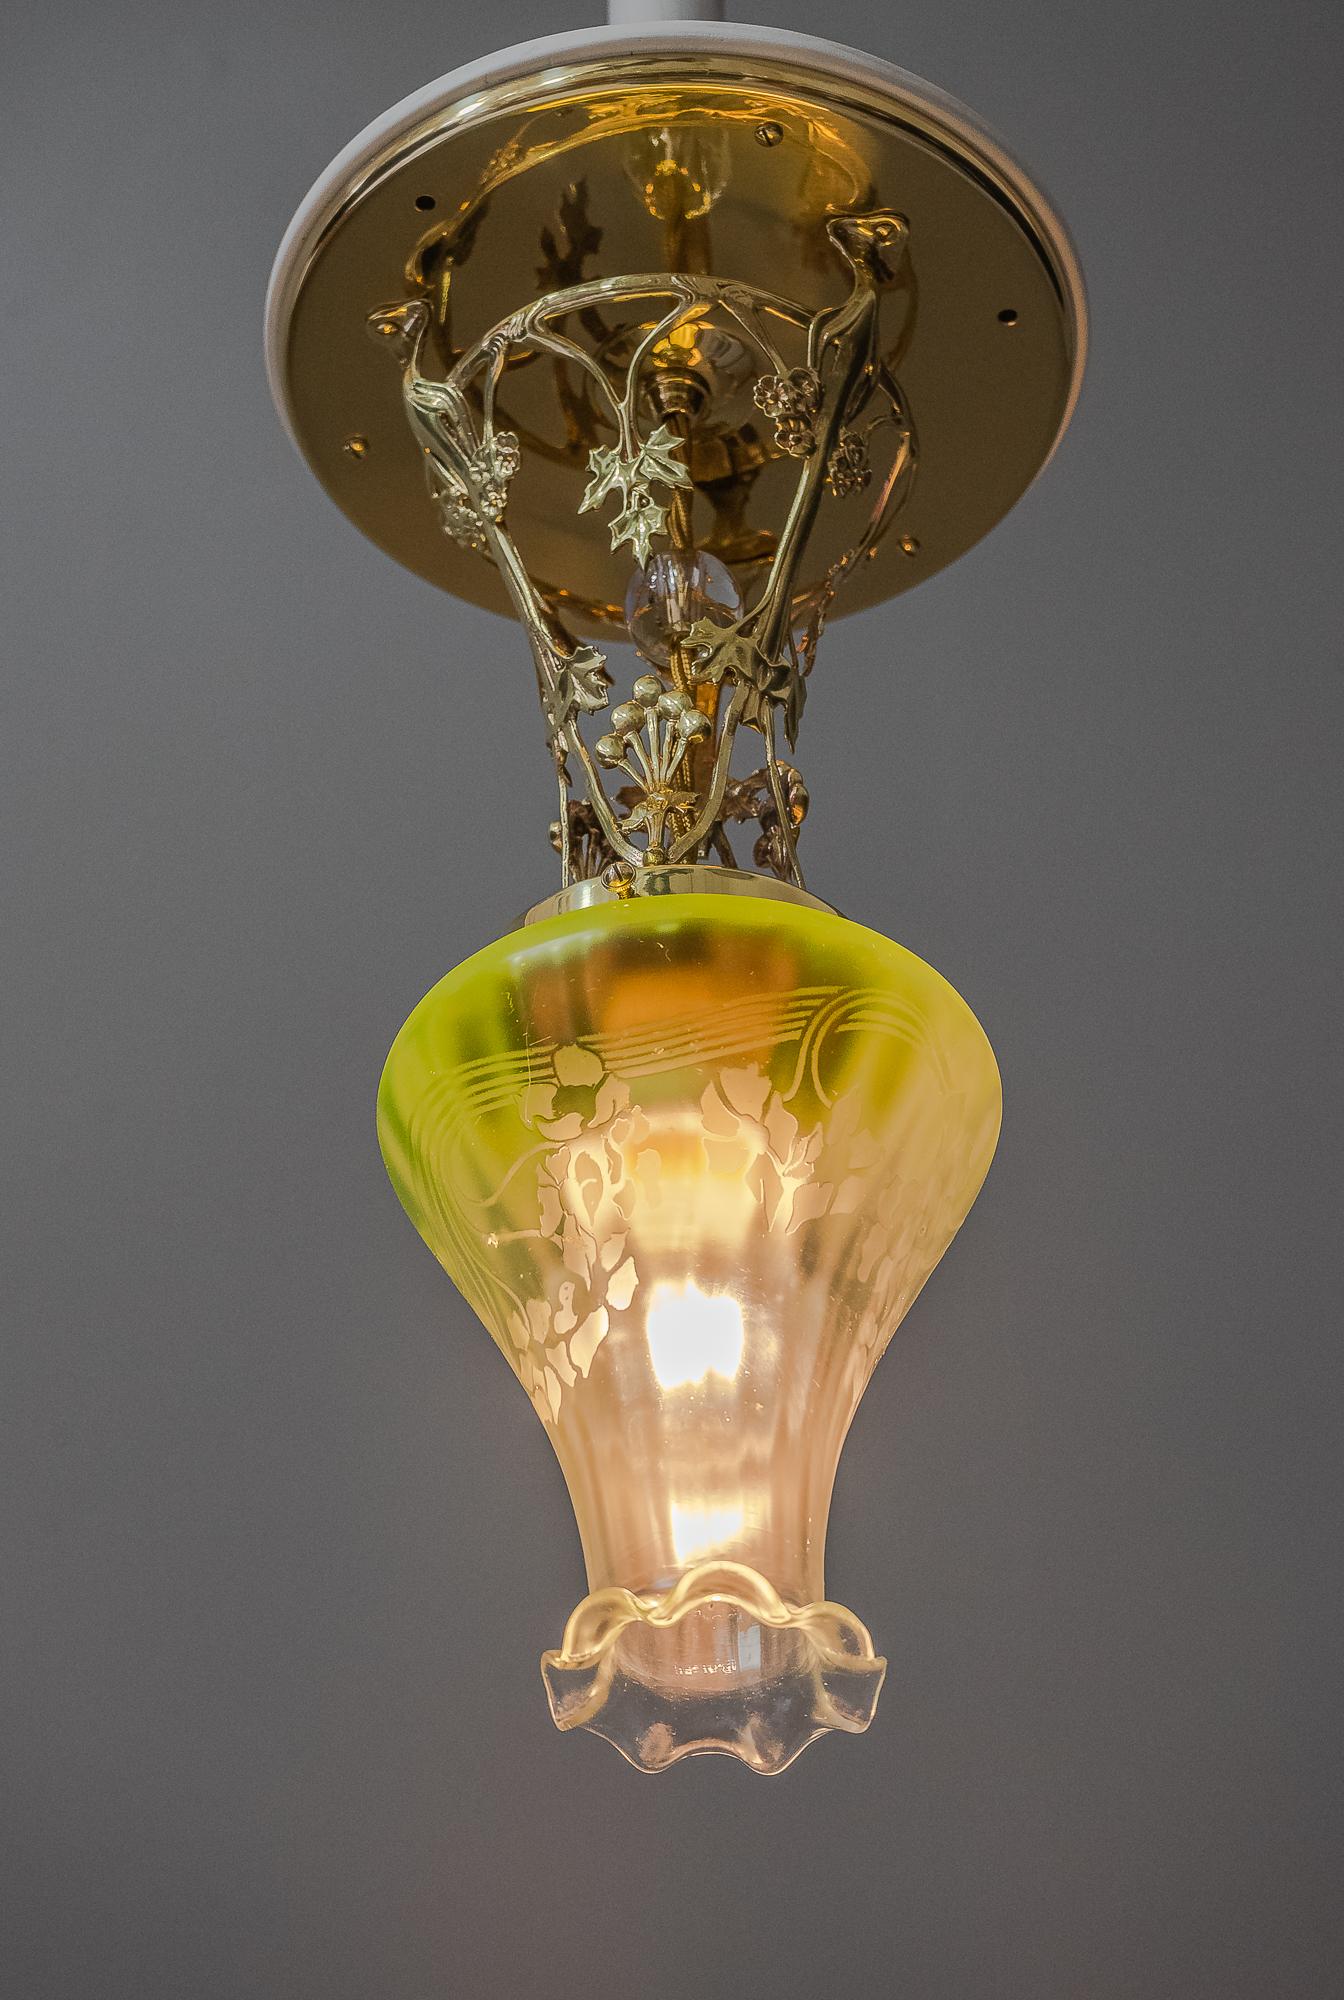 Jugendstil Ceiling Lamp Vienna circa 1908 with Original Glass Shade For Sale 10